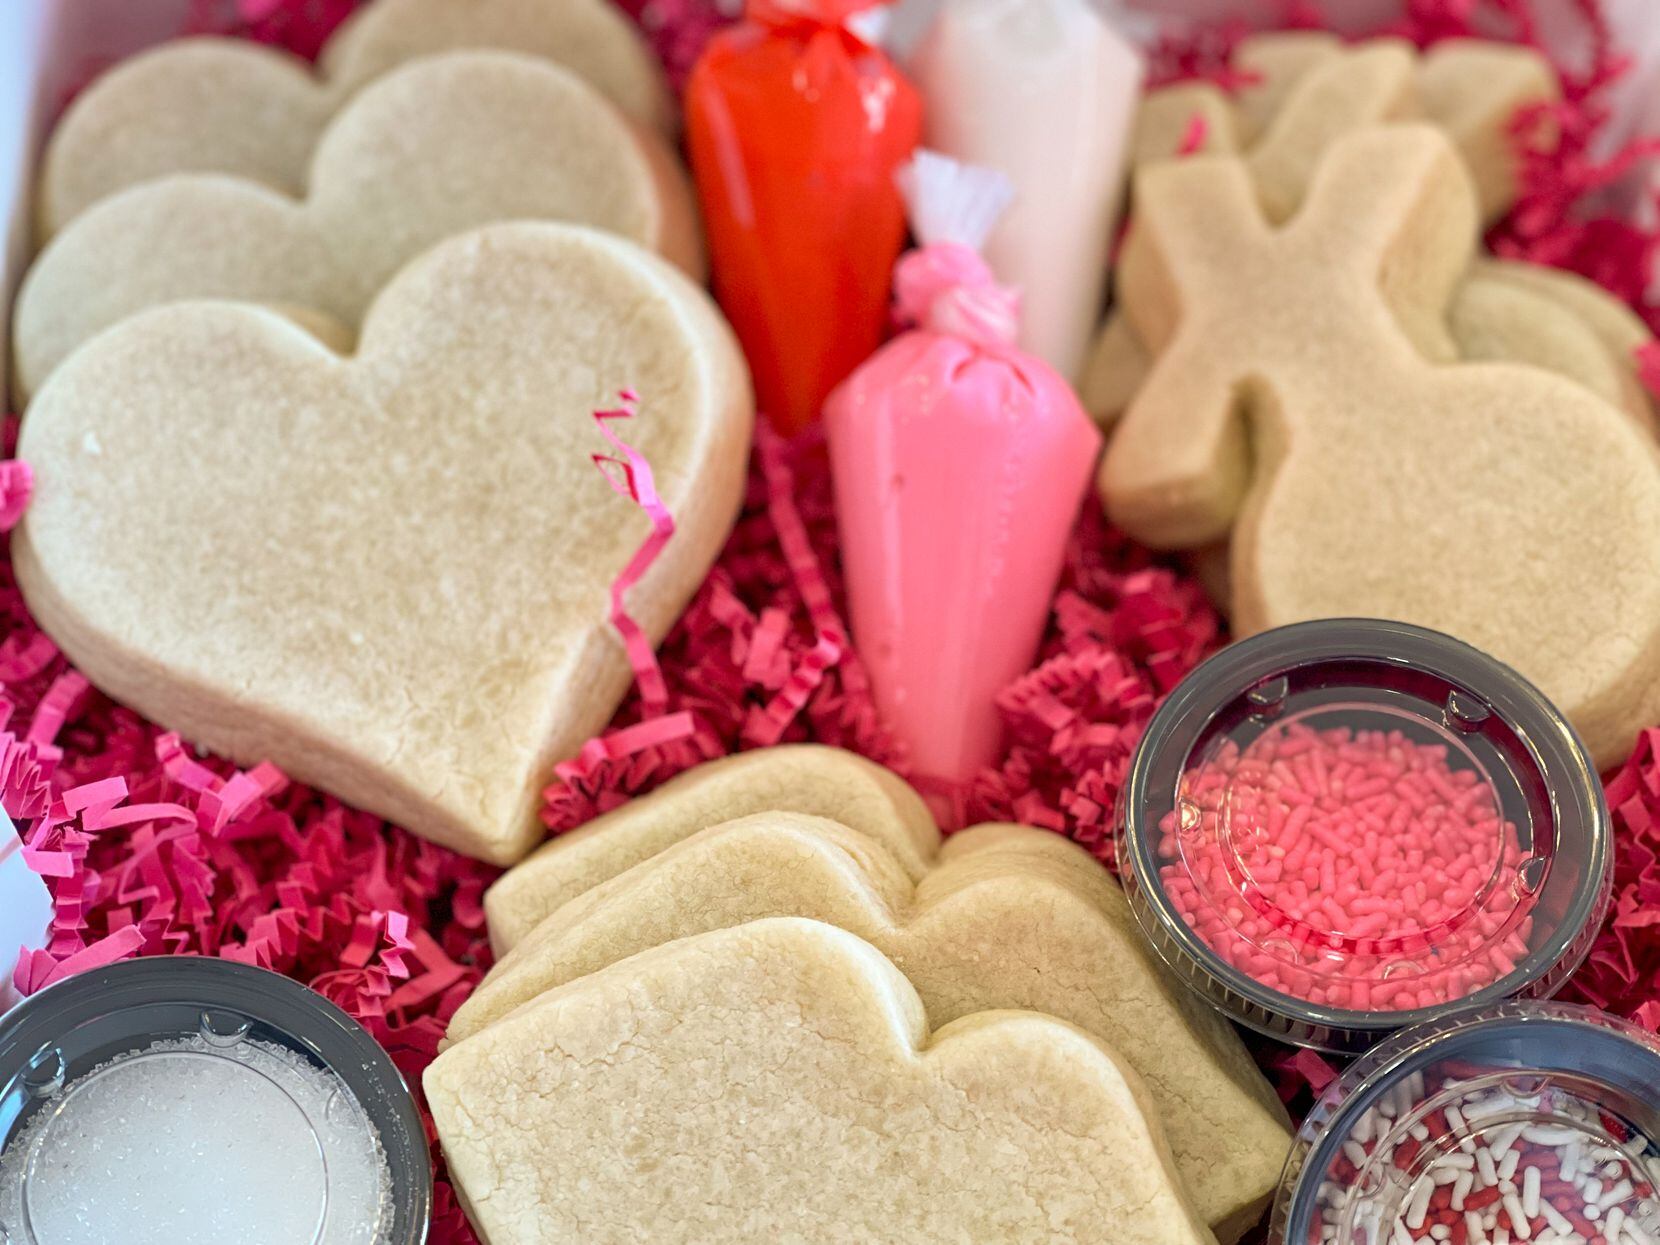 J. Rae's Dallas offers Valentine's Day-themed cookie decorating kits Feb. 1-14, 2022. // Email permission from Allie Lesiuk, allie@strausspr.com //